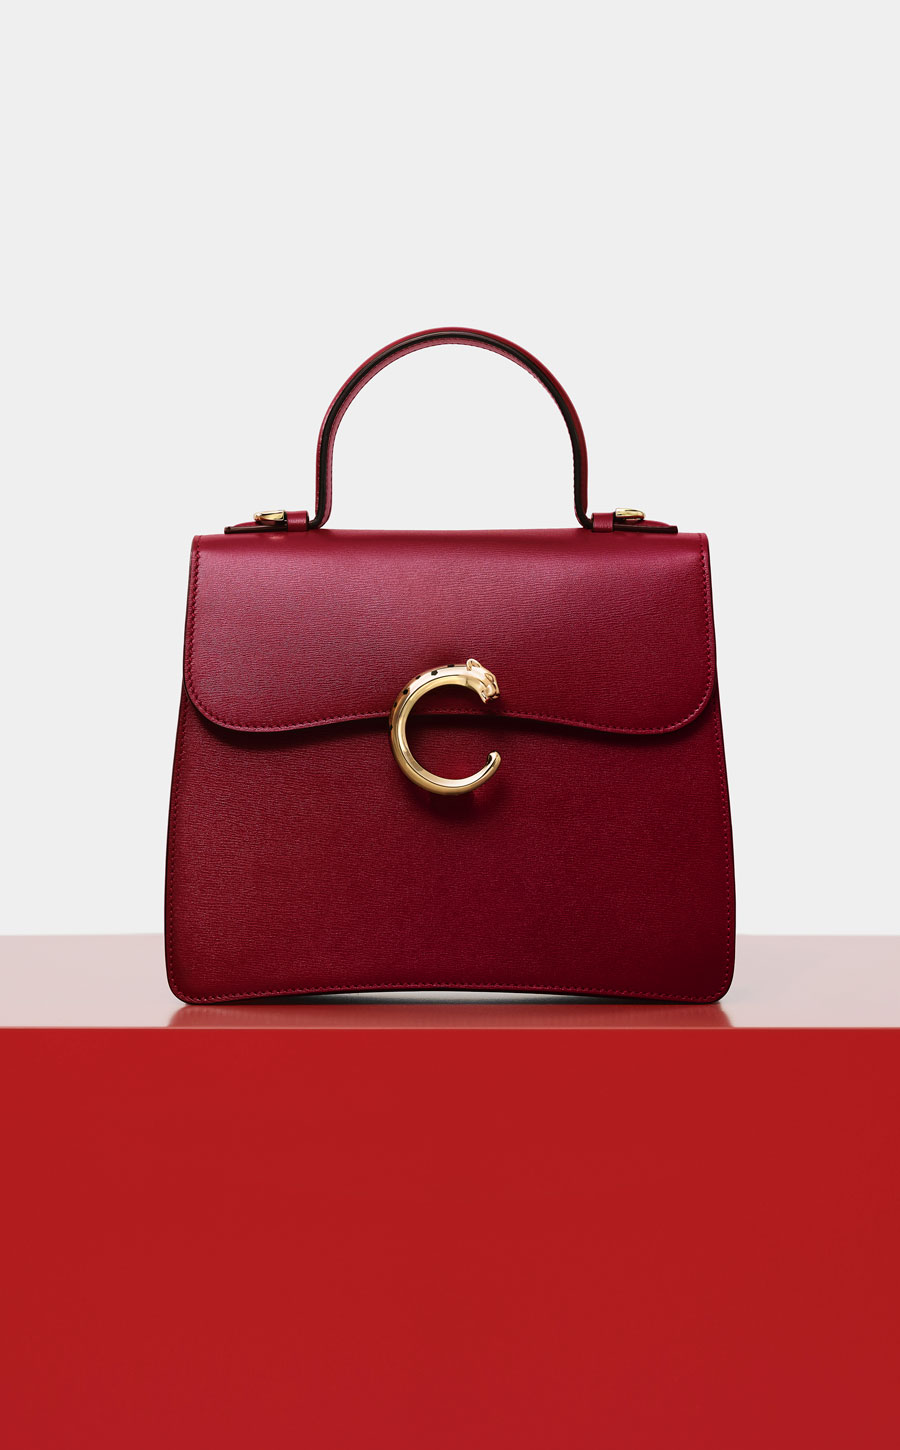 The Panthère signs the new Cartier bag